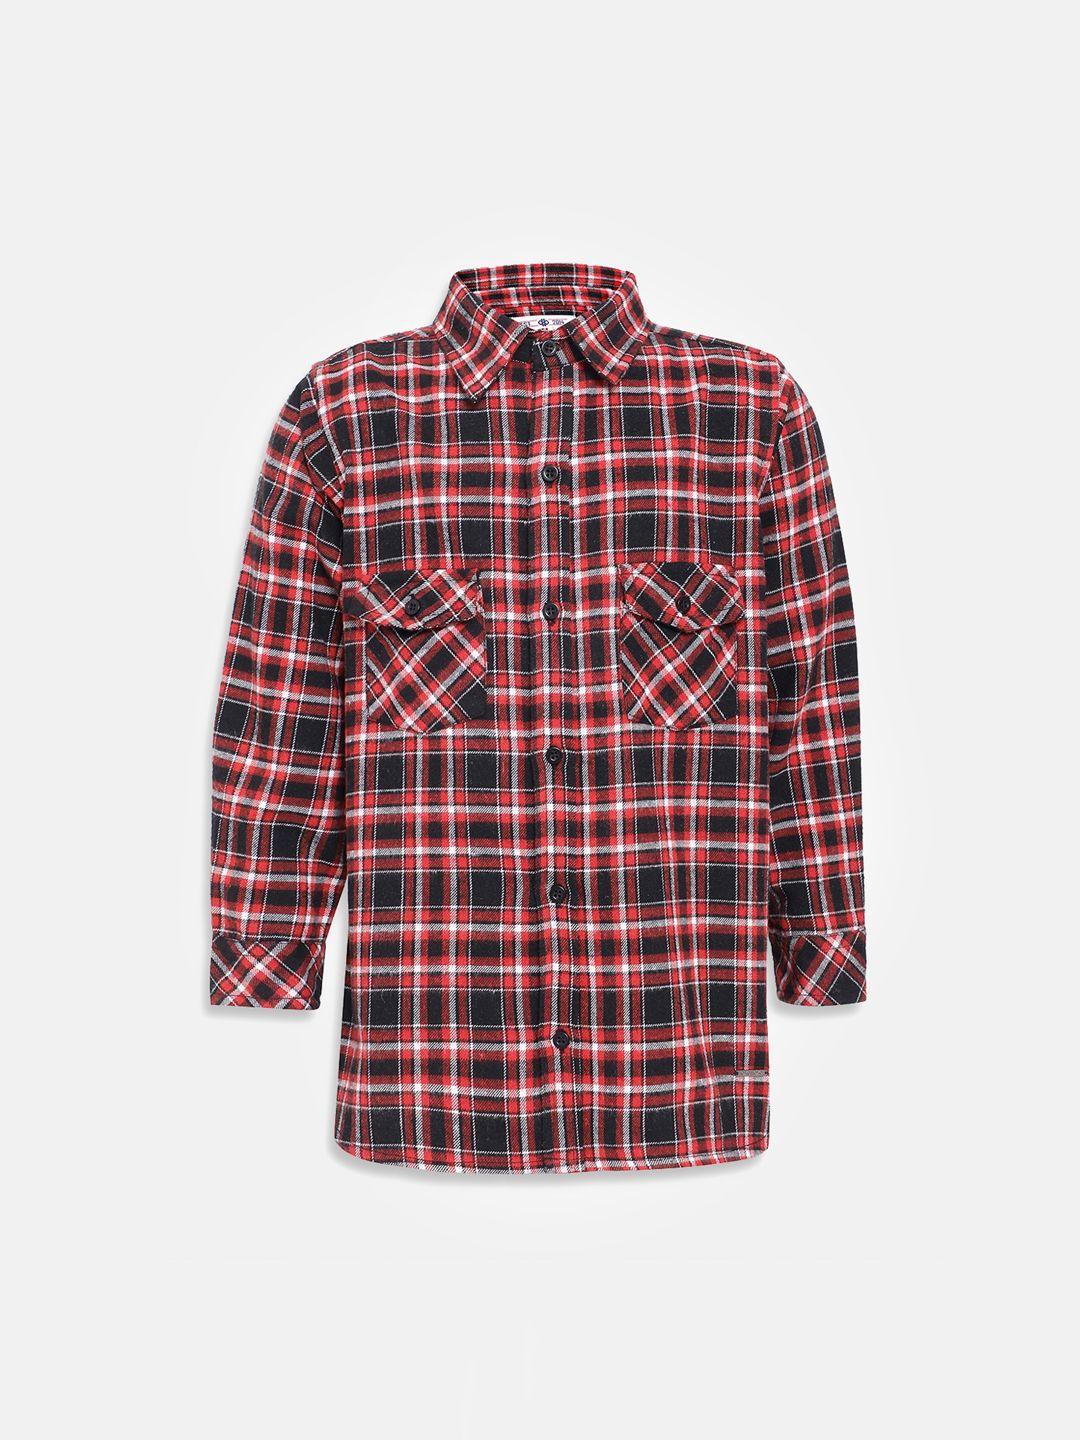 oxolloxo boys red & black regular fit checked formal shirt